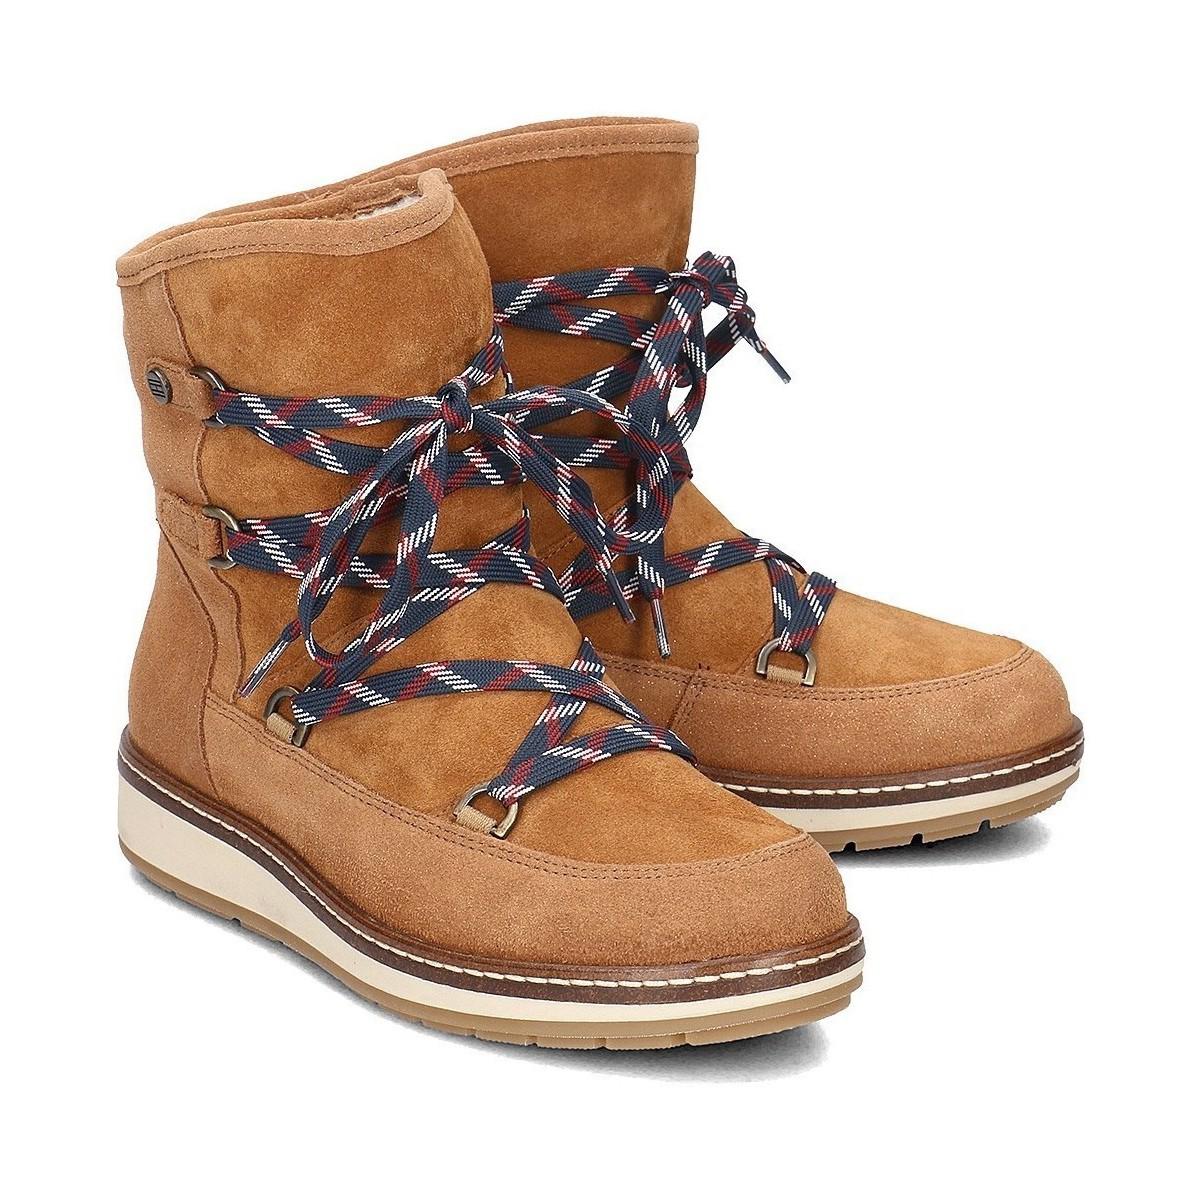 tommy hilfiger winter boots Cheaper Than Retail Price> Buy Clothing,  Accessories and lifestyle products for women & men -